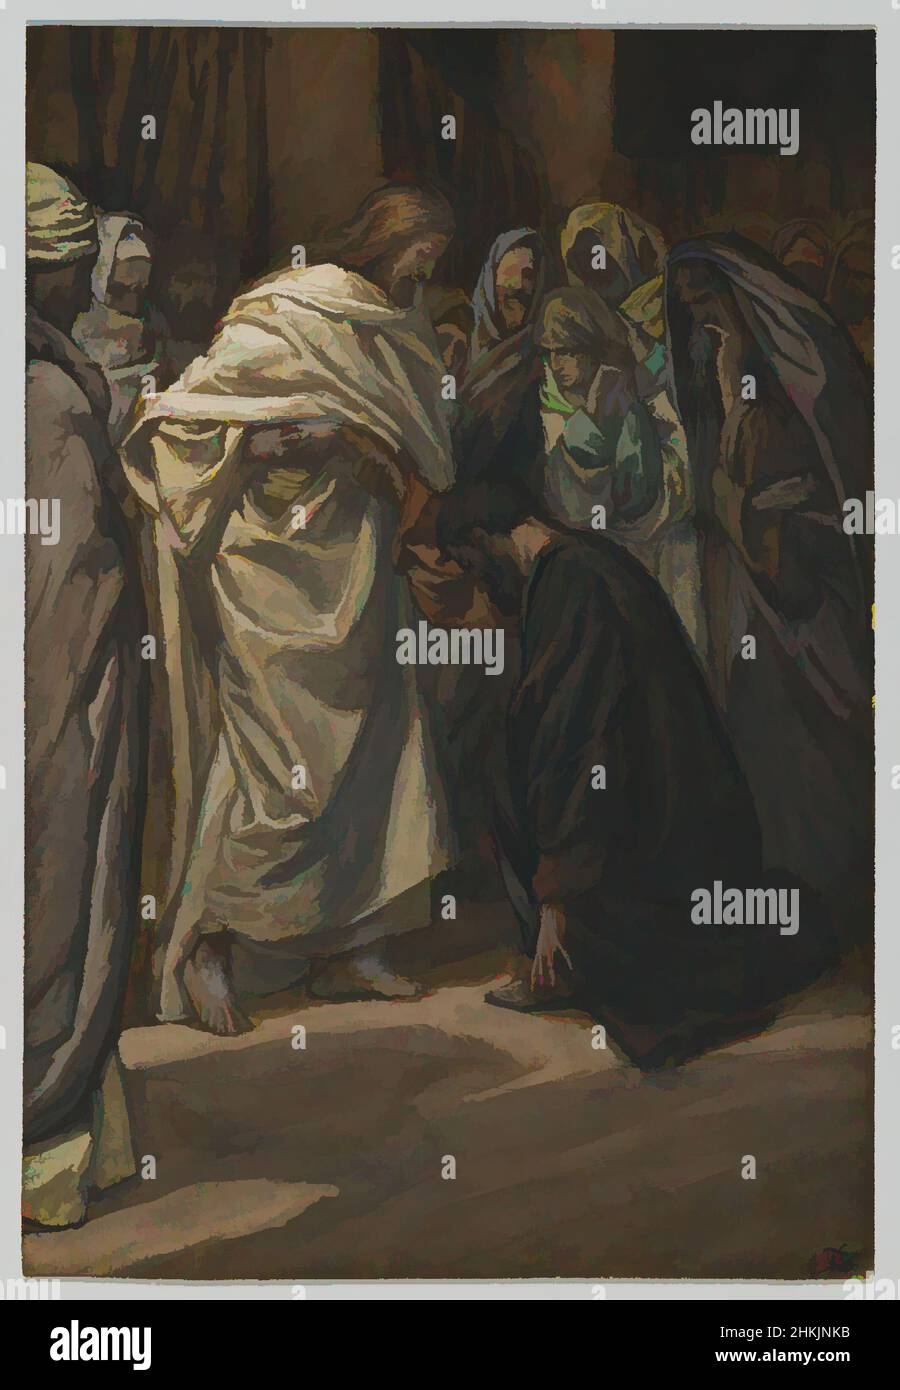 Art inspired by The Disbelief of Saint Thomas, Incredulité de Saint Thomas, The Life of Our Lord Jesus Christ, La Vie de Notre-Seigneur Jésus-Christ, James Tissot, French, 1836-1902, Opaque watercolor over graphite on gray wove paper, France, 1886-1894, Image: 7 13/16 x 5 5/16 in., 19.8, Classic works modernized by Artotop with a splash of modernity. Shapes, color and value, eye-catching visual impact on art. Emotions through freedom of artworks in a contemporary way. A timeless message pursuing a wildly creative new direction. Artists turning to the digital medium and creating the Artotop NFT Stock Photo